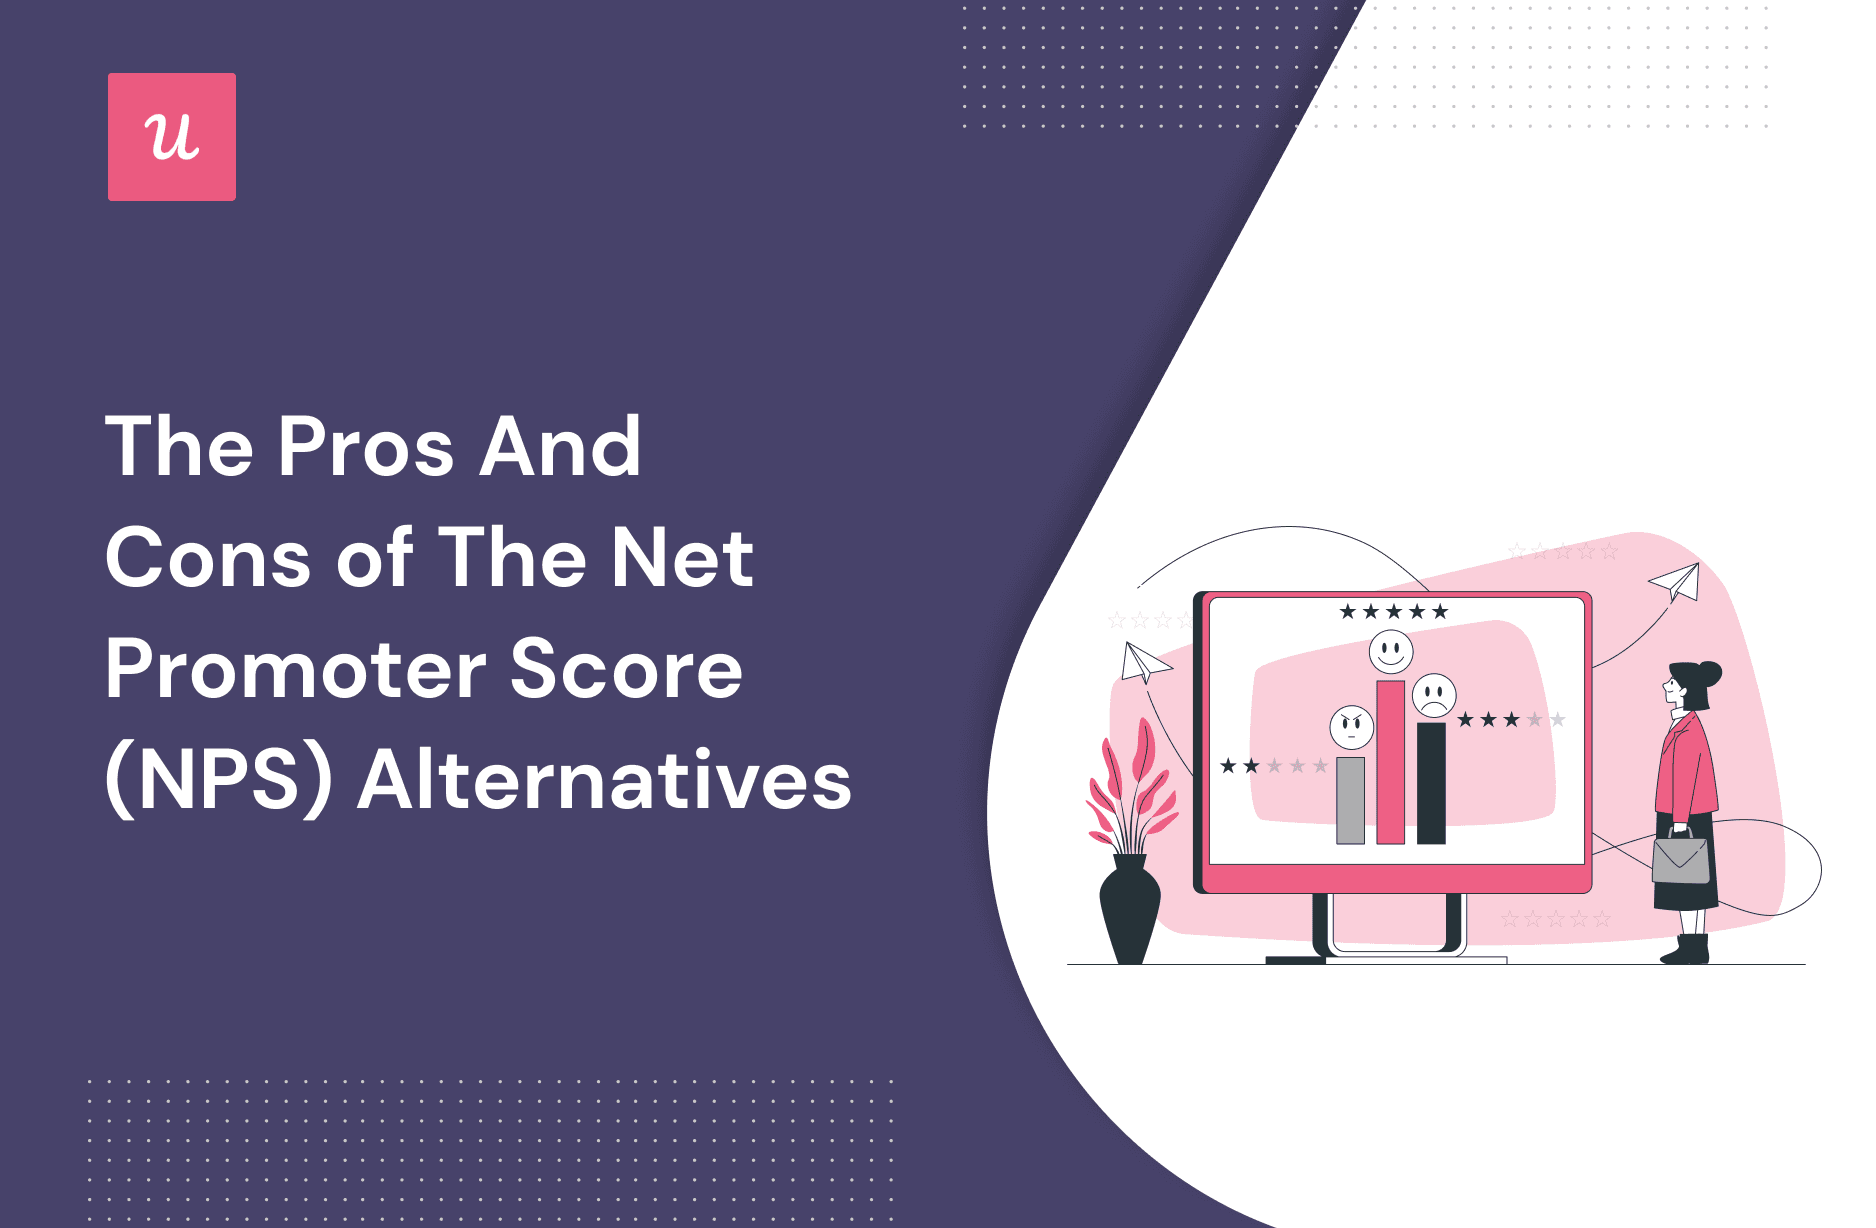 The Pros and Cons of the Net Promoter Score (NPS) Alternatives